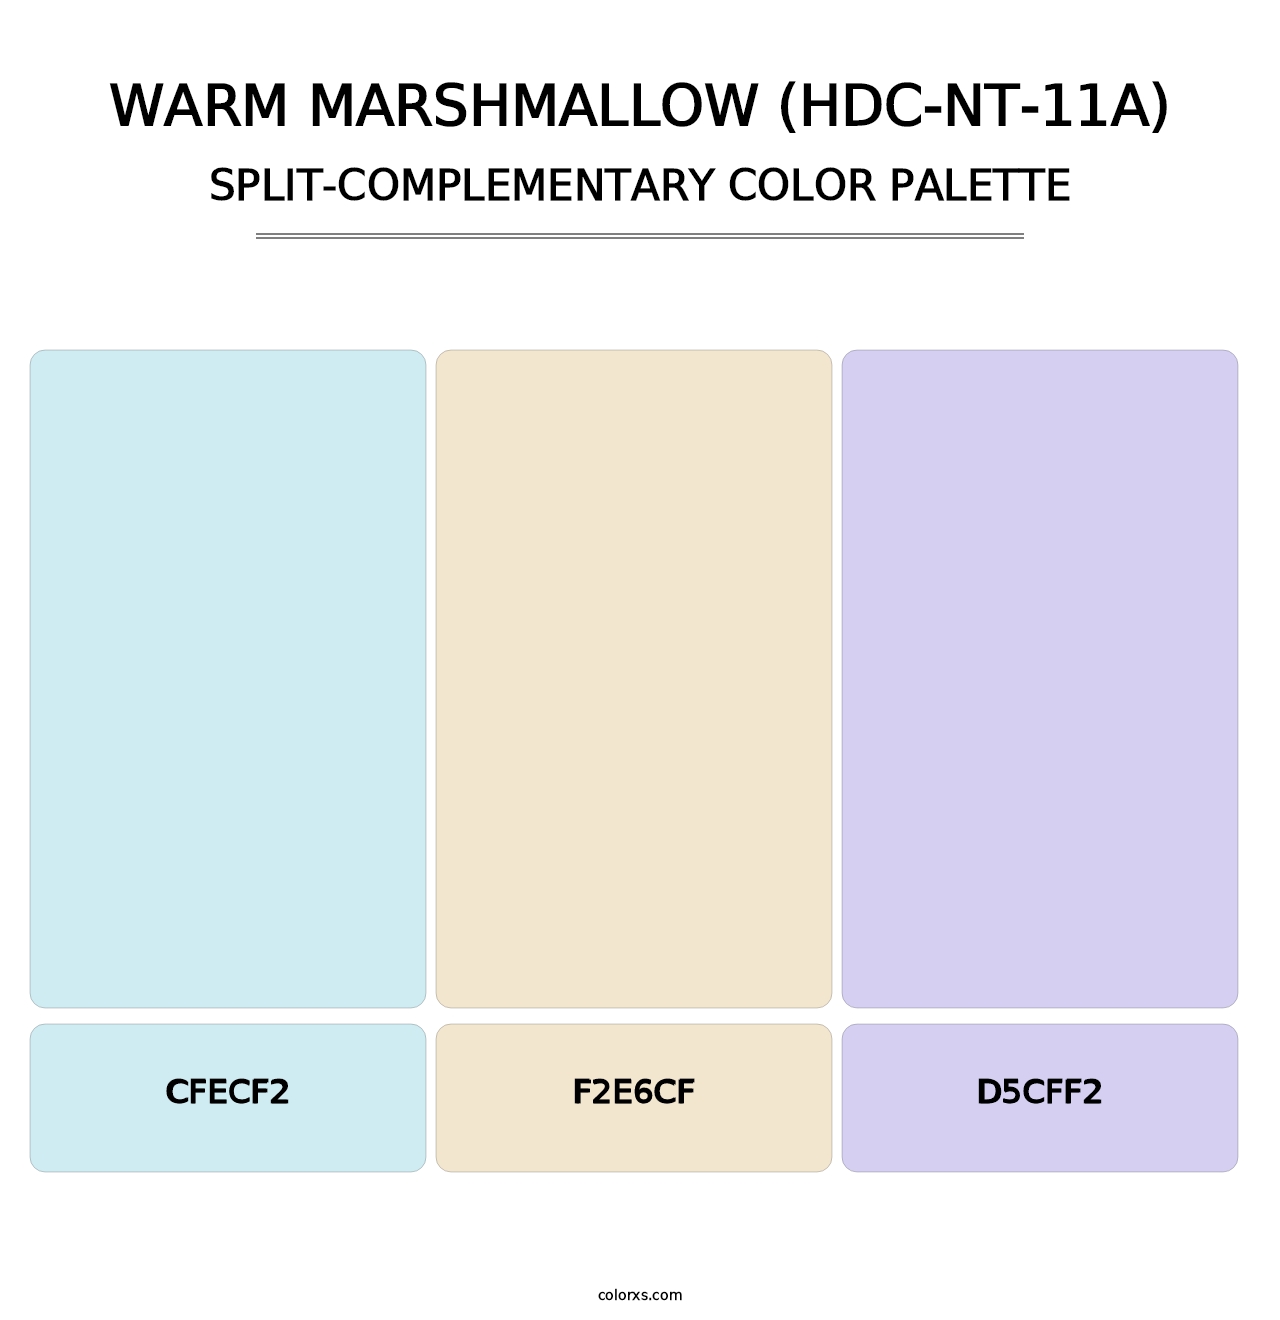 Warm Marshmallow (HDC-NT-11A) - Split-Complementary Color Palette